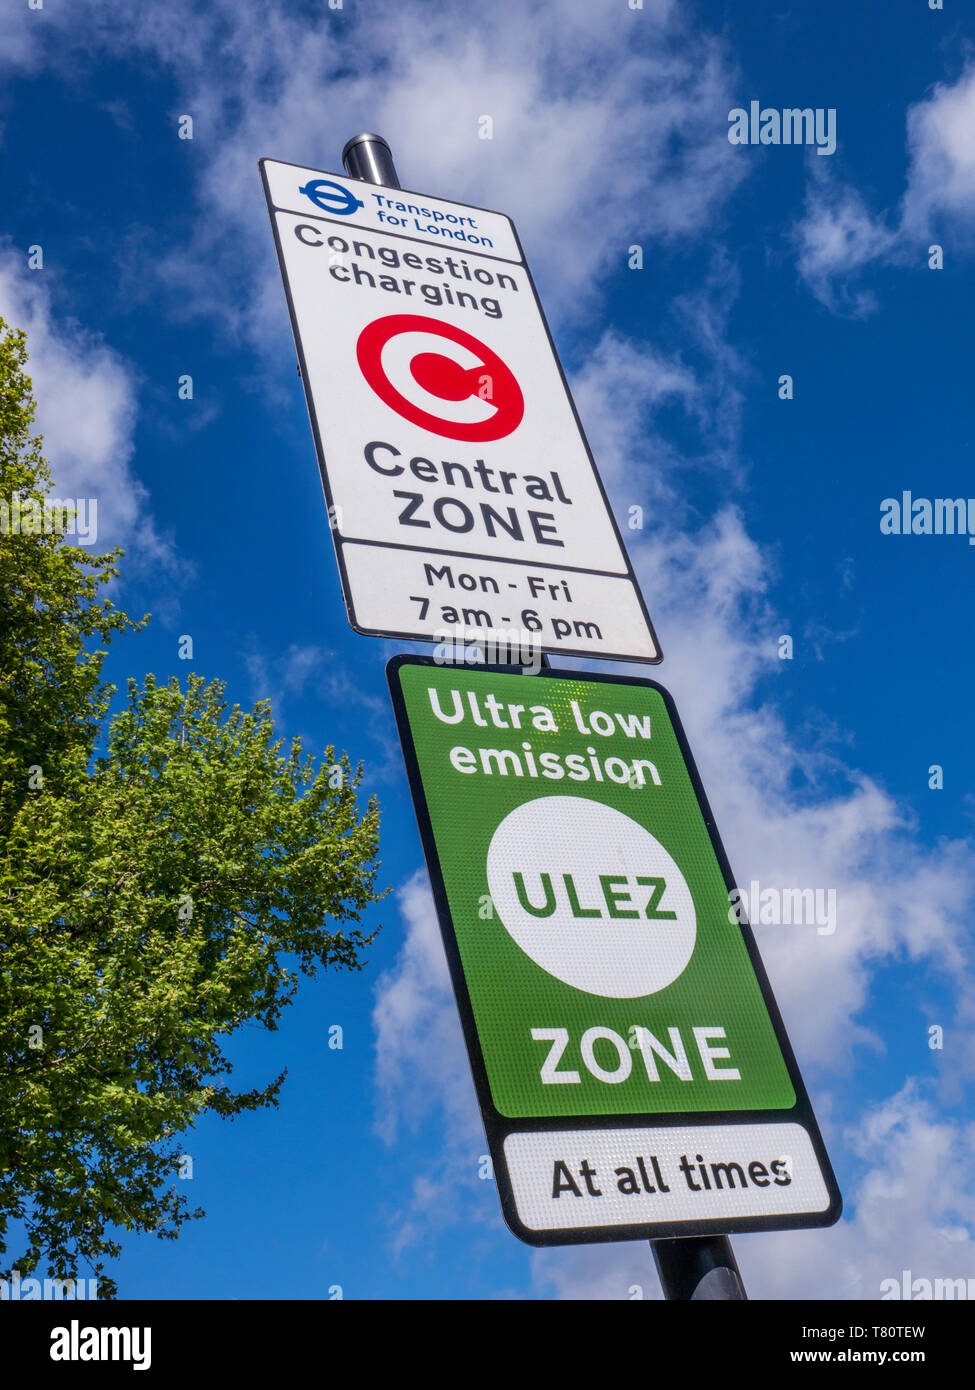 'ULEZ' TFL congestion/emission charging central London zone sign with 'ULEZ' ultra low zone sign against blue sky with tree in fresh green leaf  SE11 Stock Photo